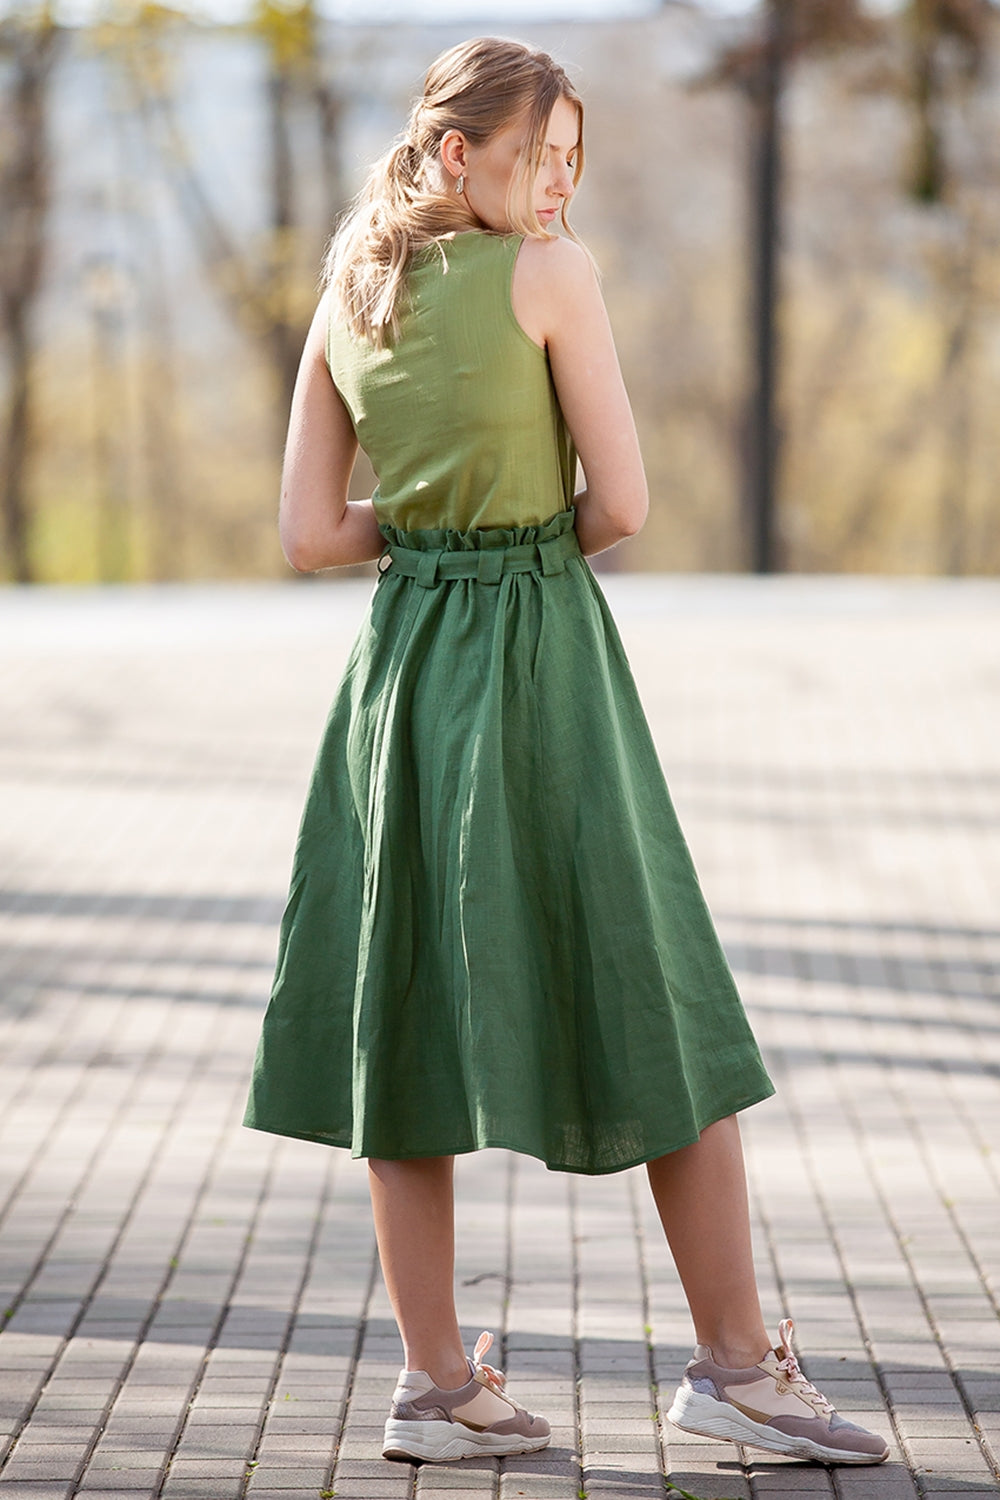 Dark green linen skirts with side pockets